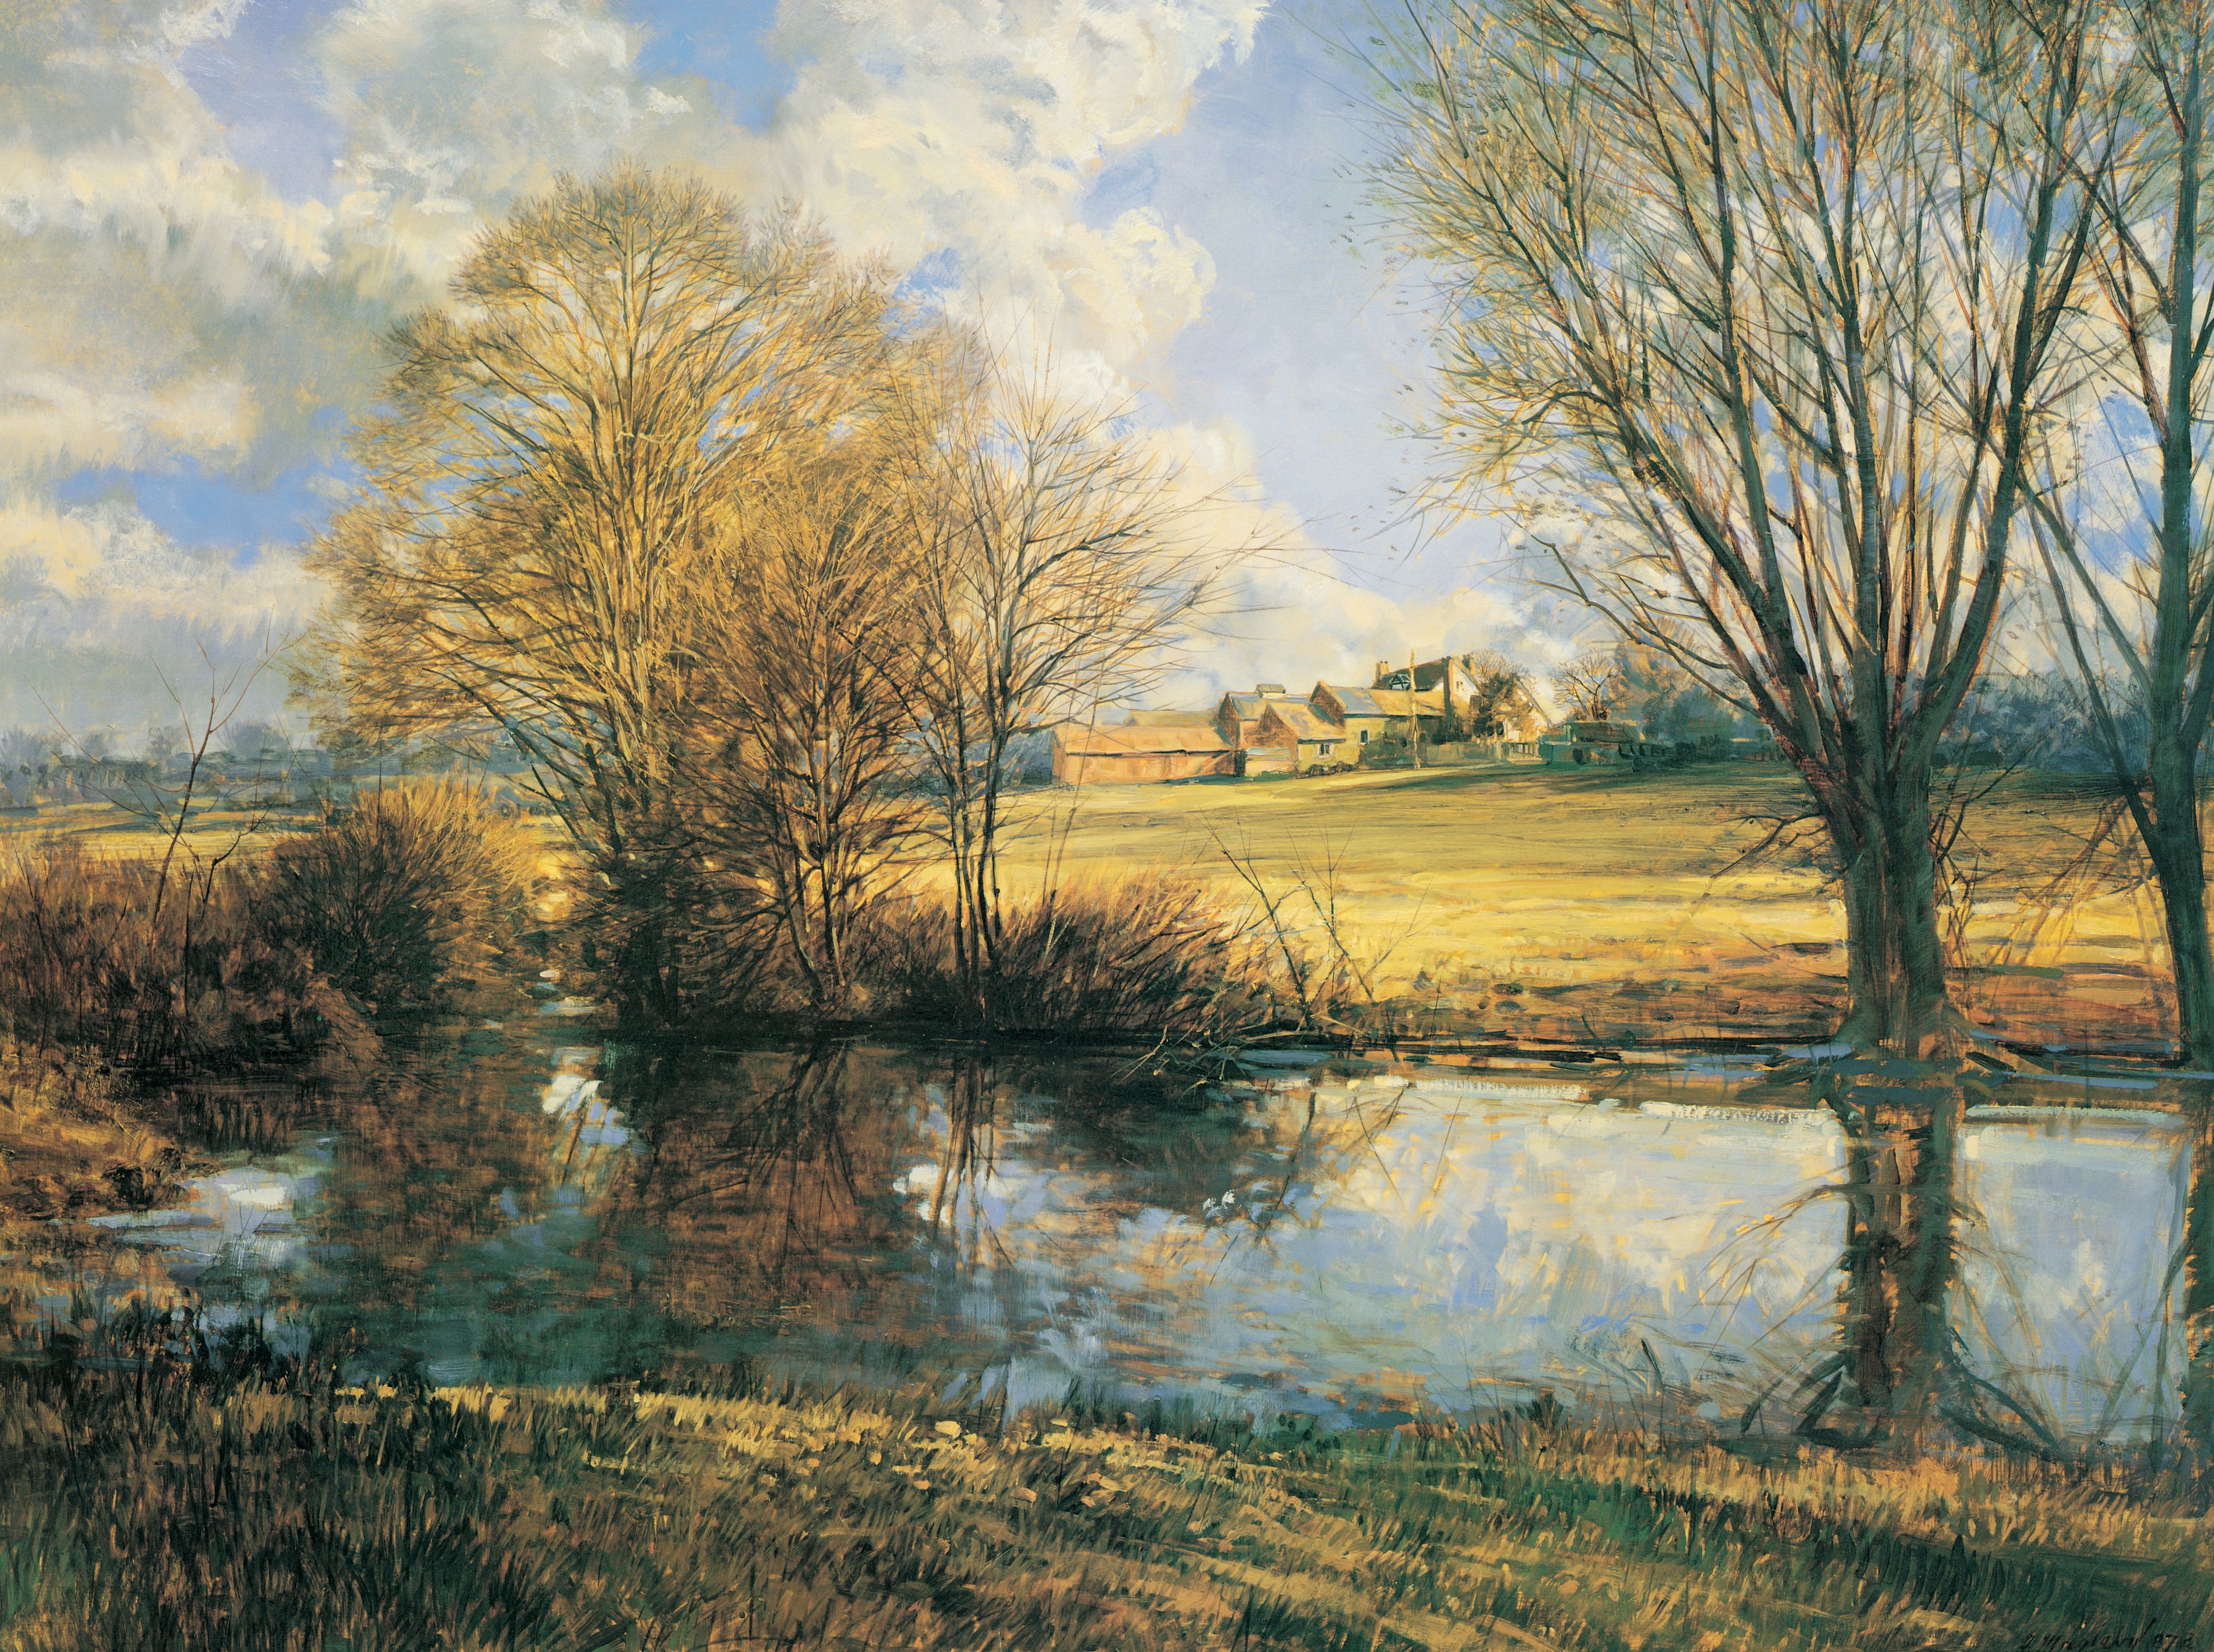 Benbow Farm and Pond, by Francis R. (Frank) Magleby